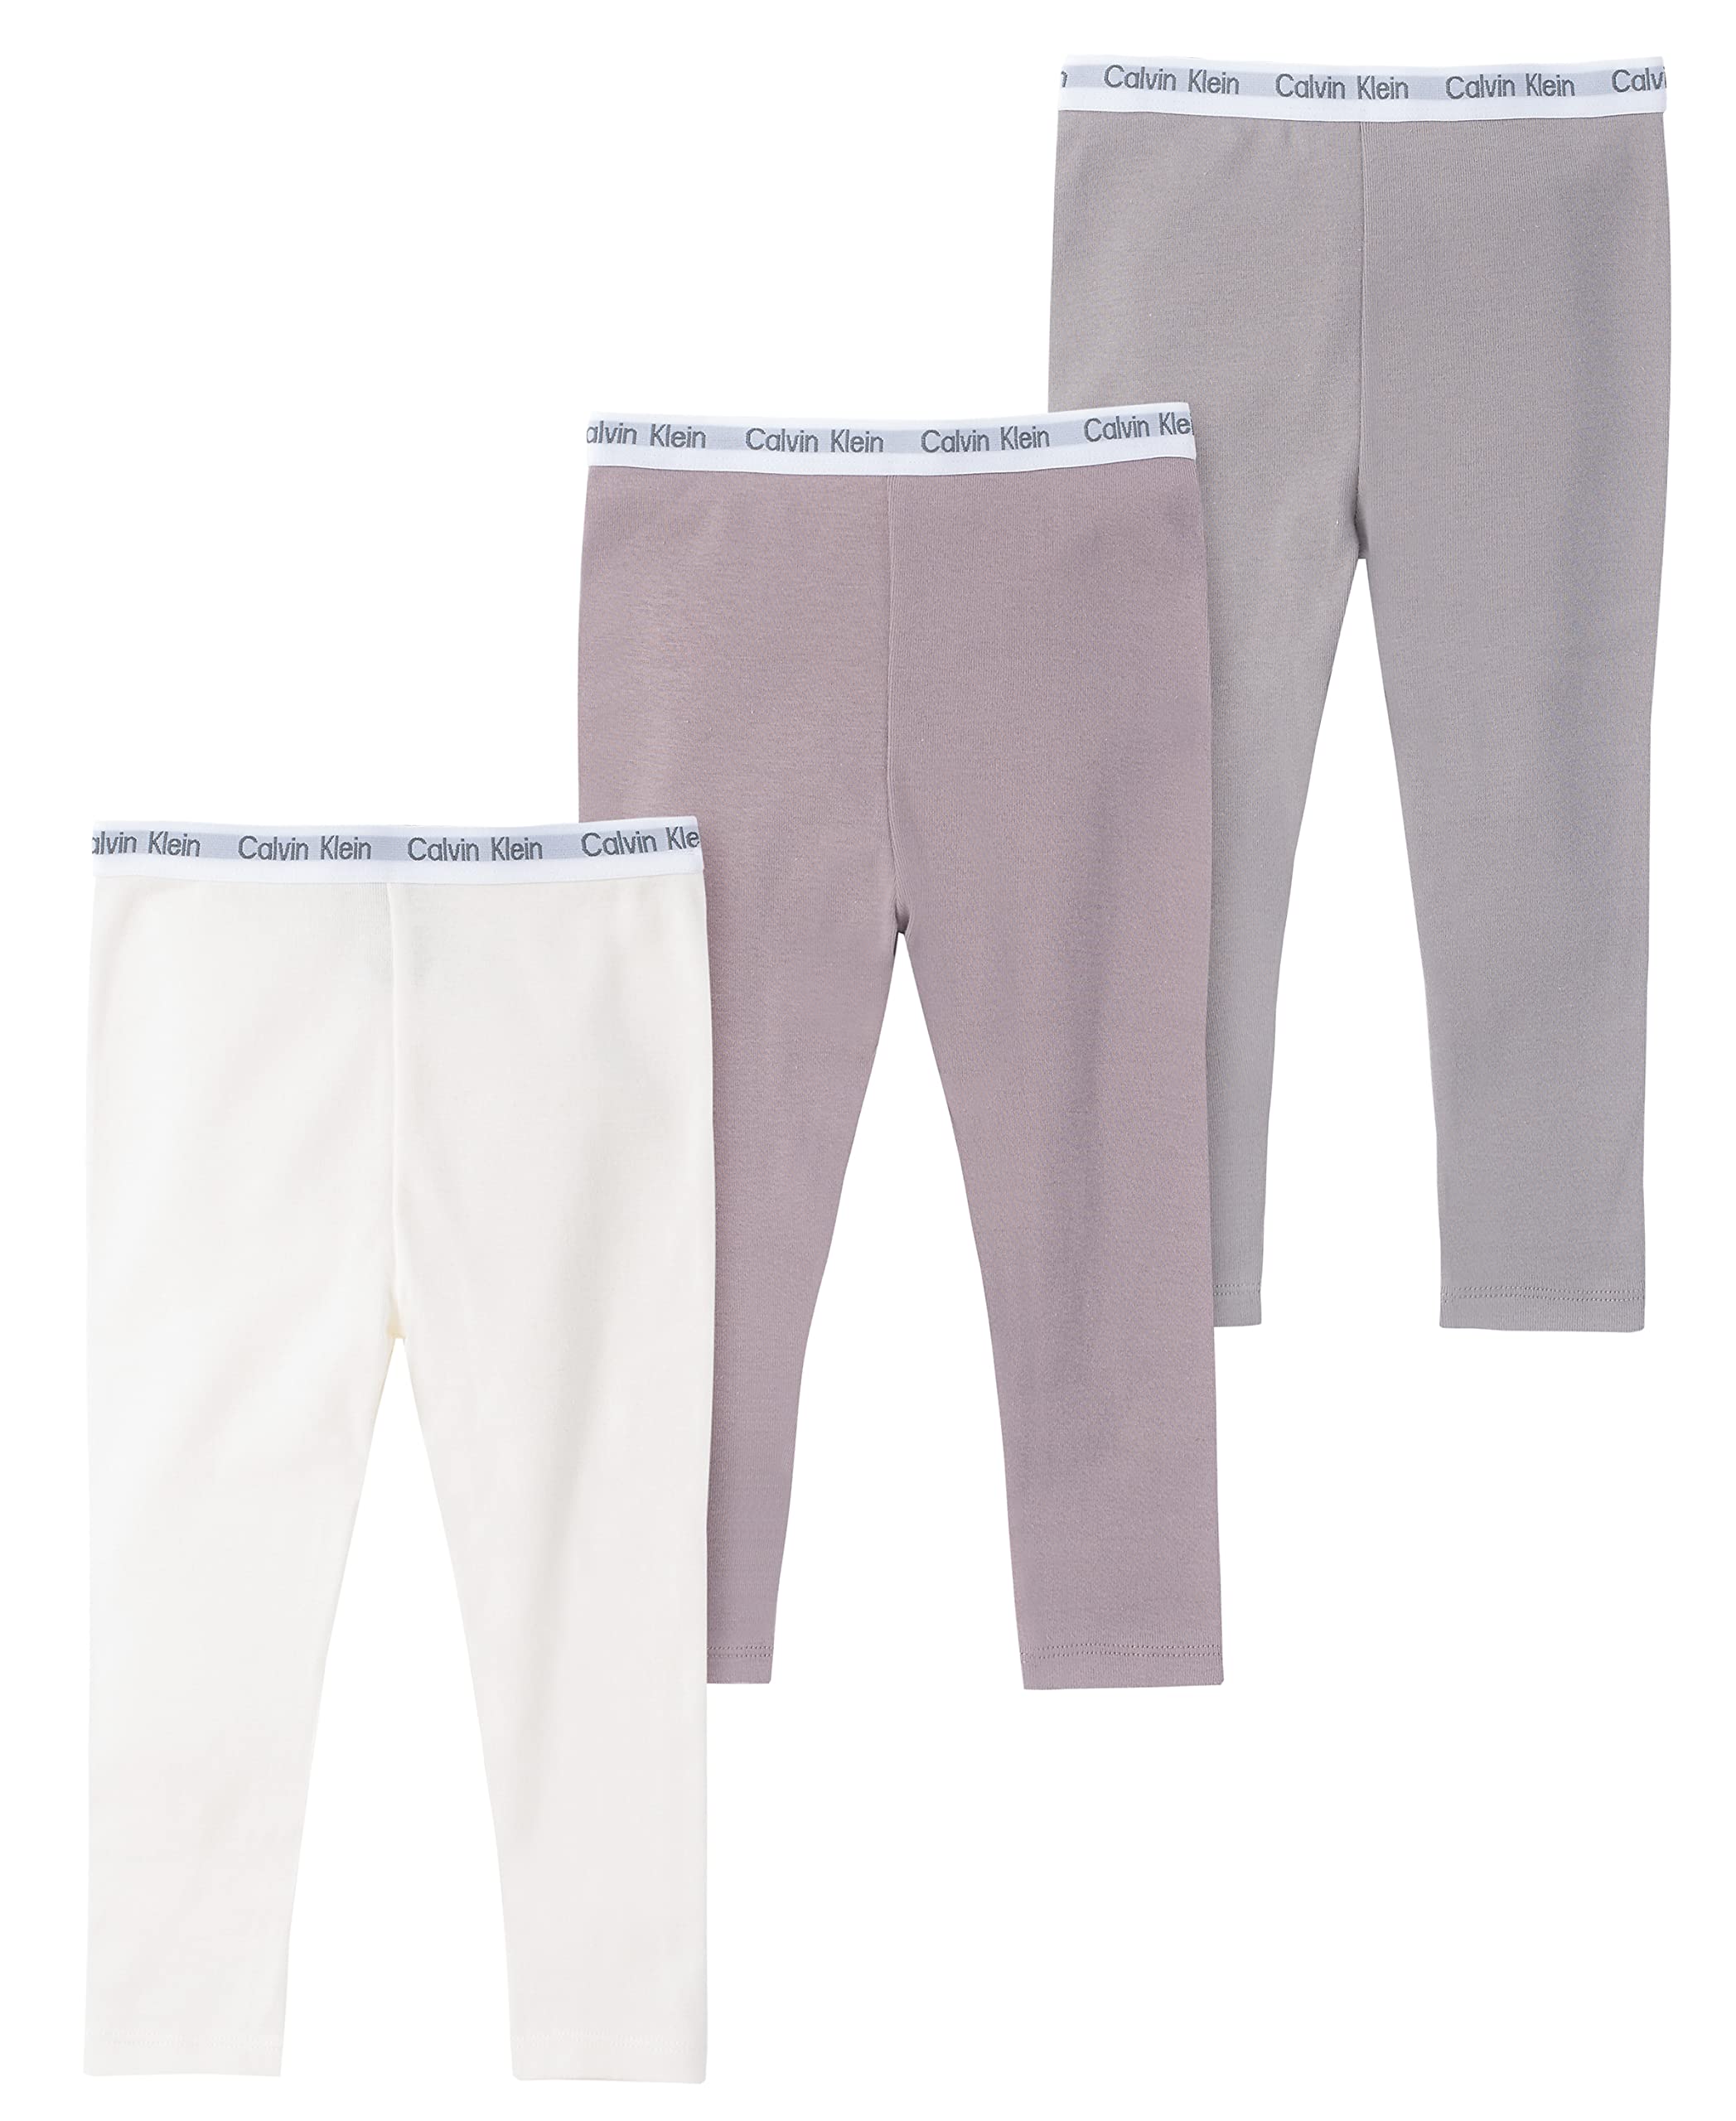 Calvin Klein Unisex Baby 3-Pack Cotton Pants, Everyday Casual Wear, Ultra-Soft & Comfortable Fit, Purple Dove/Egret/Gull, 0/3M